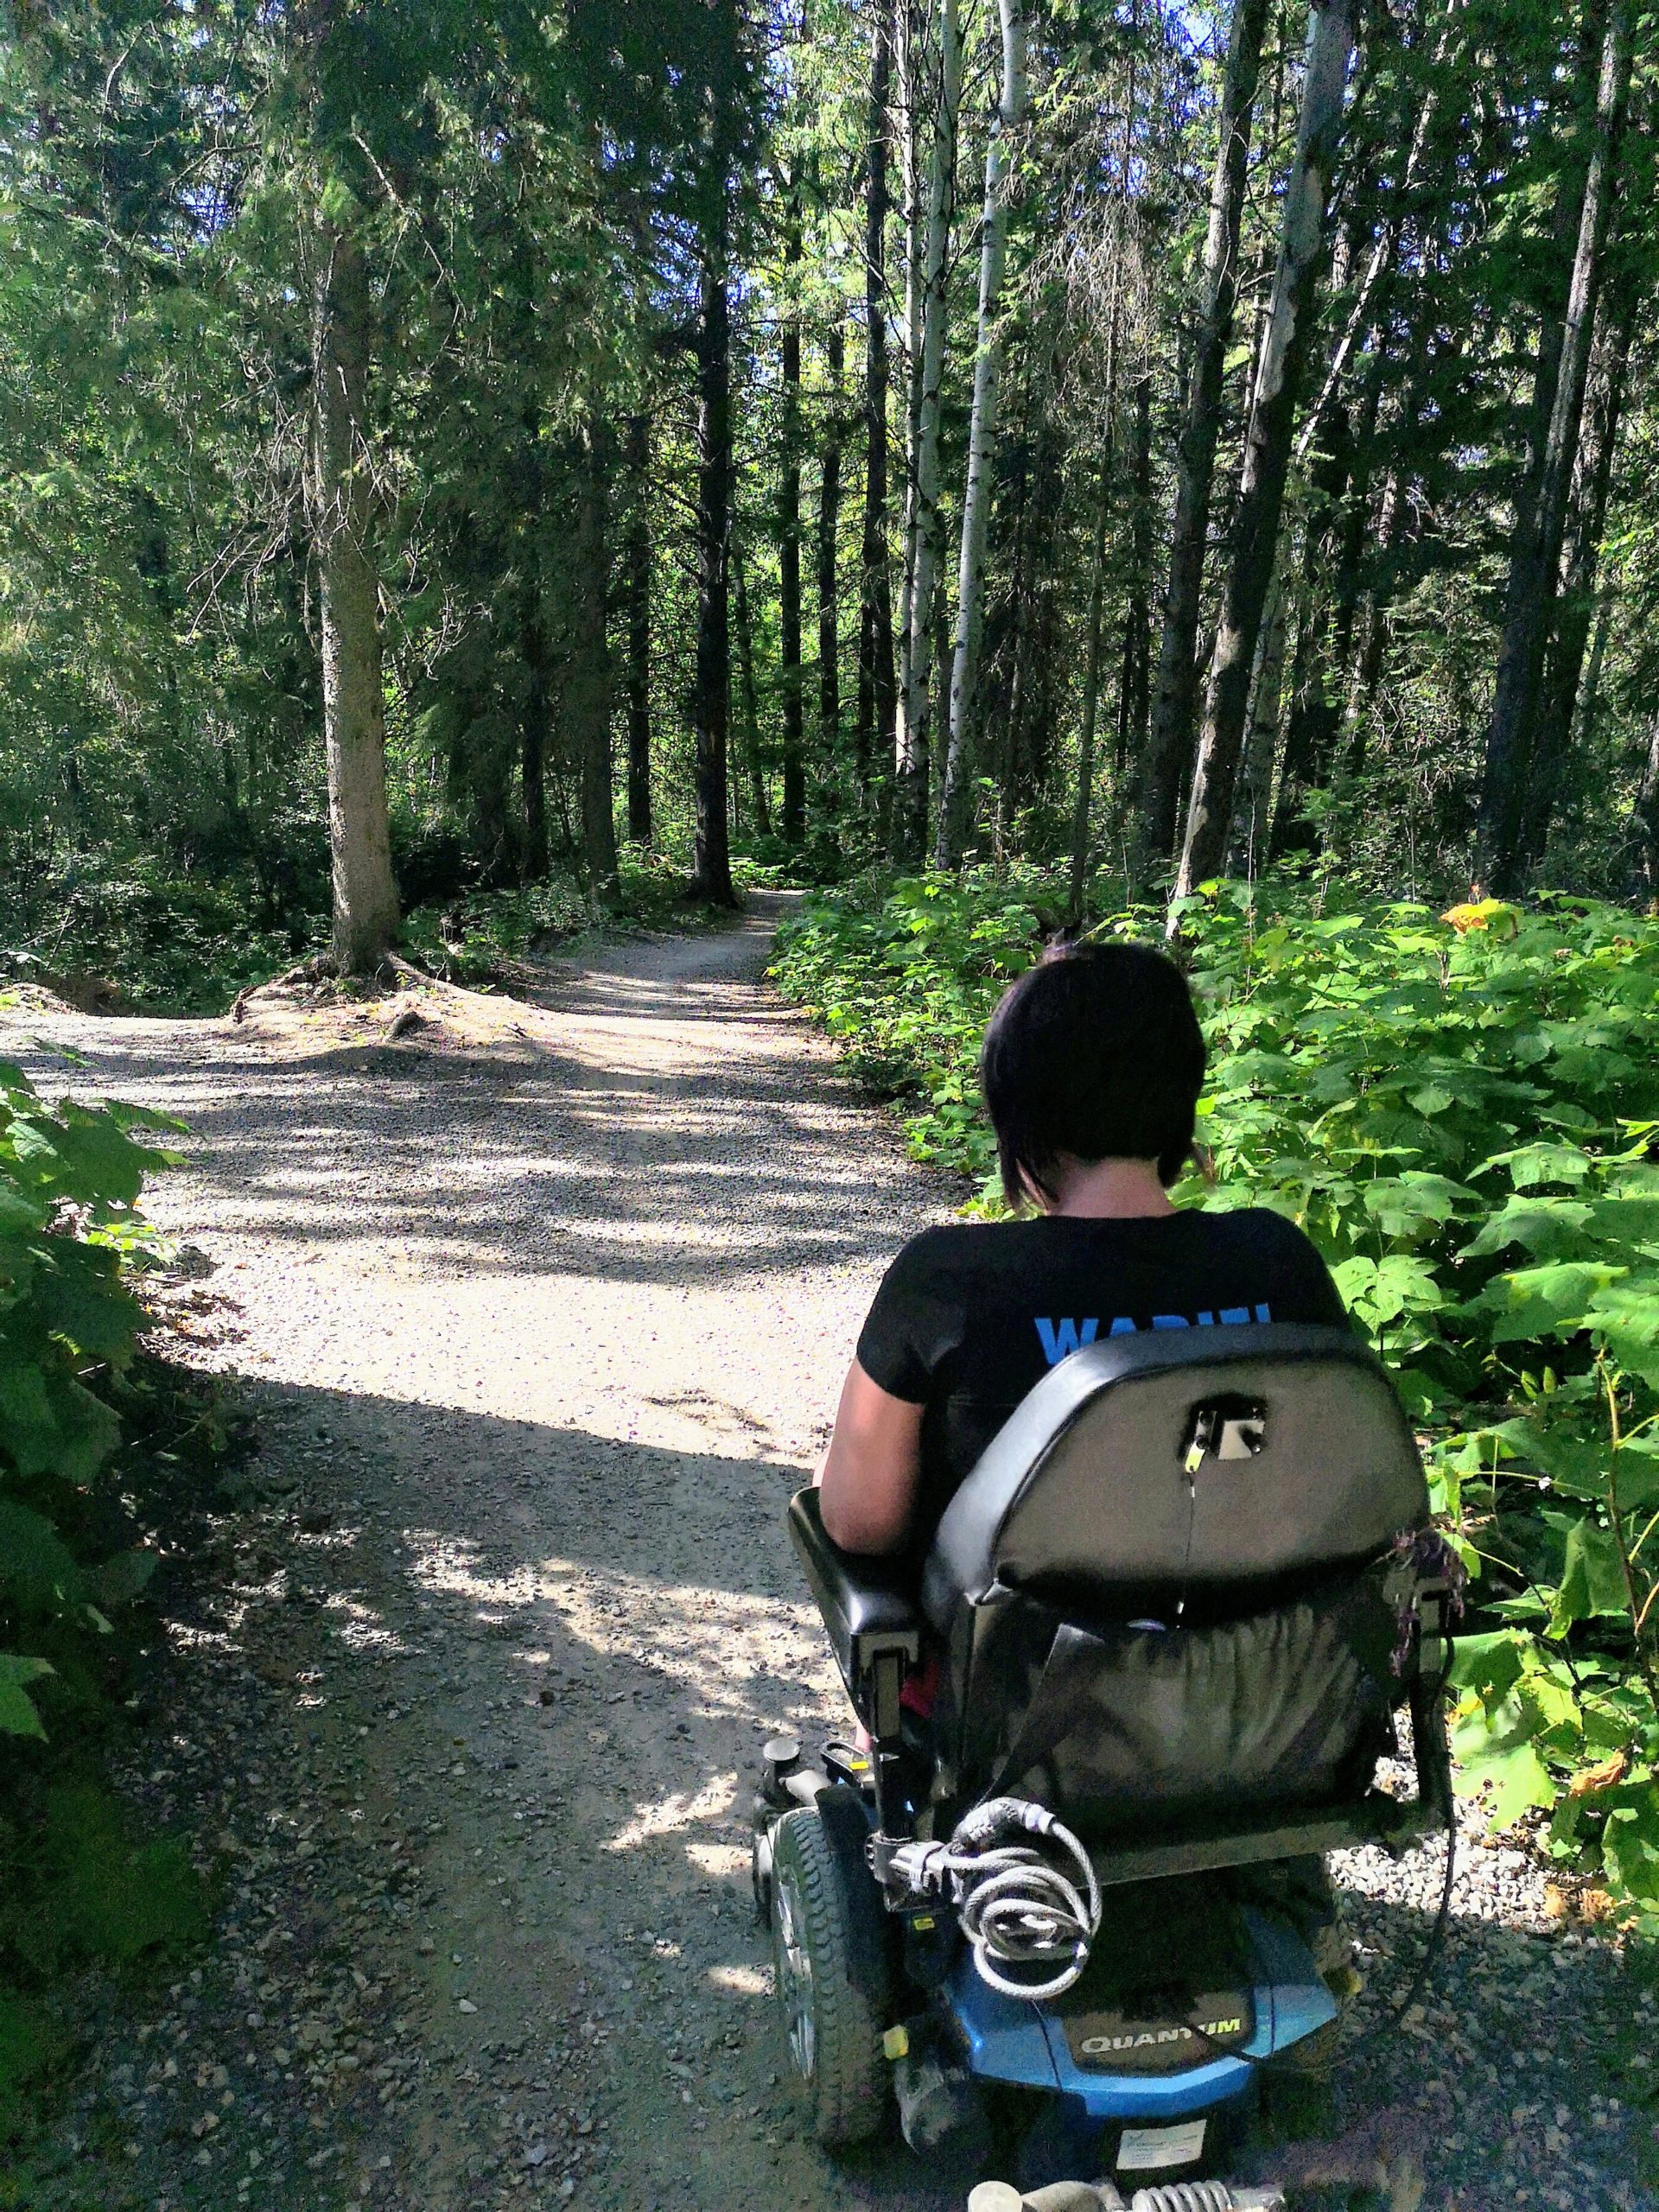 A woman navigates through a forest trail on a moterized chair